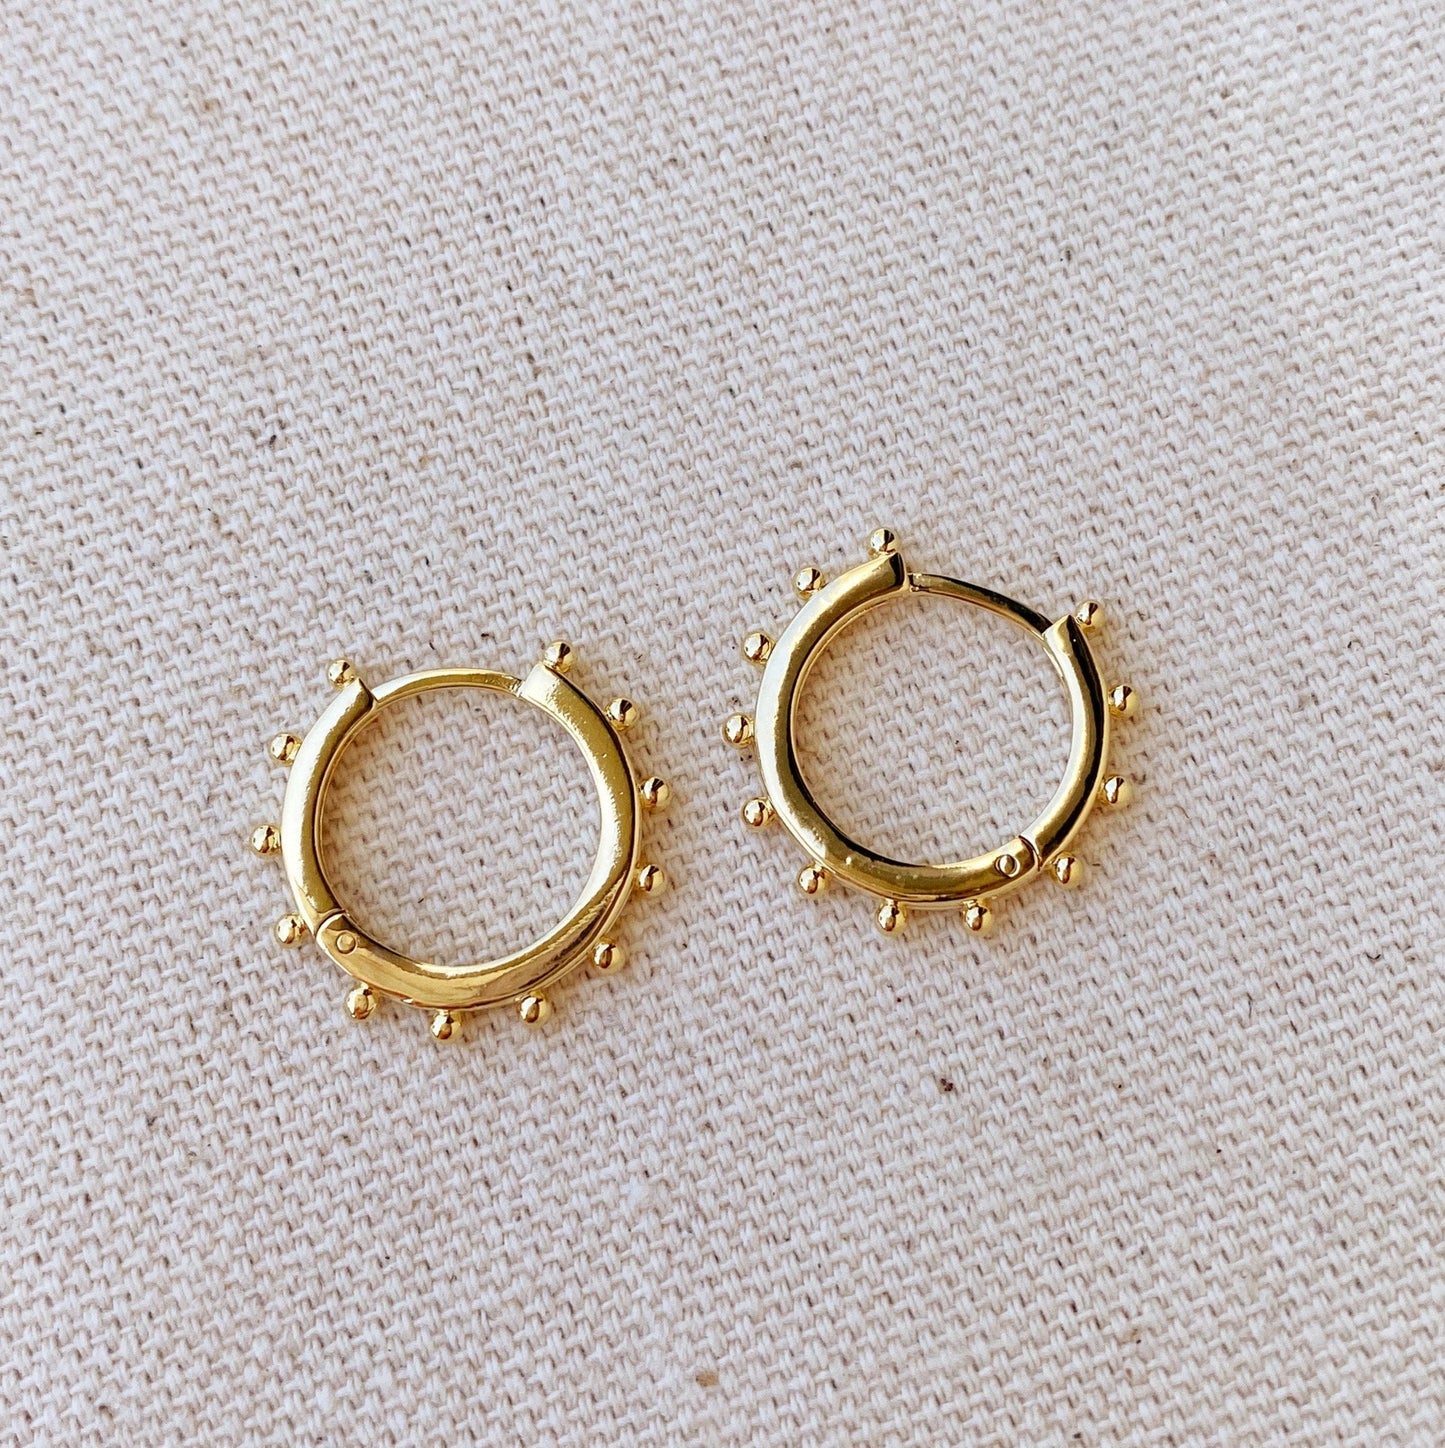 GoldFi 18k Gold Filled Hoop Earrings With Ball Around For Wholesale and Jewelry Supplies